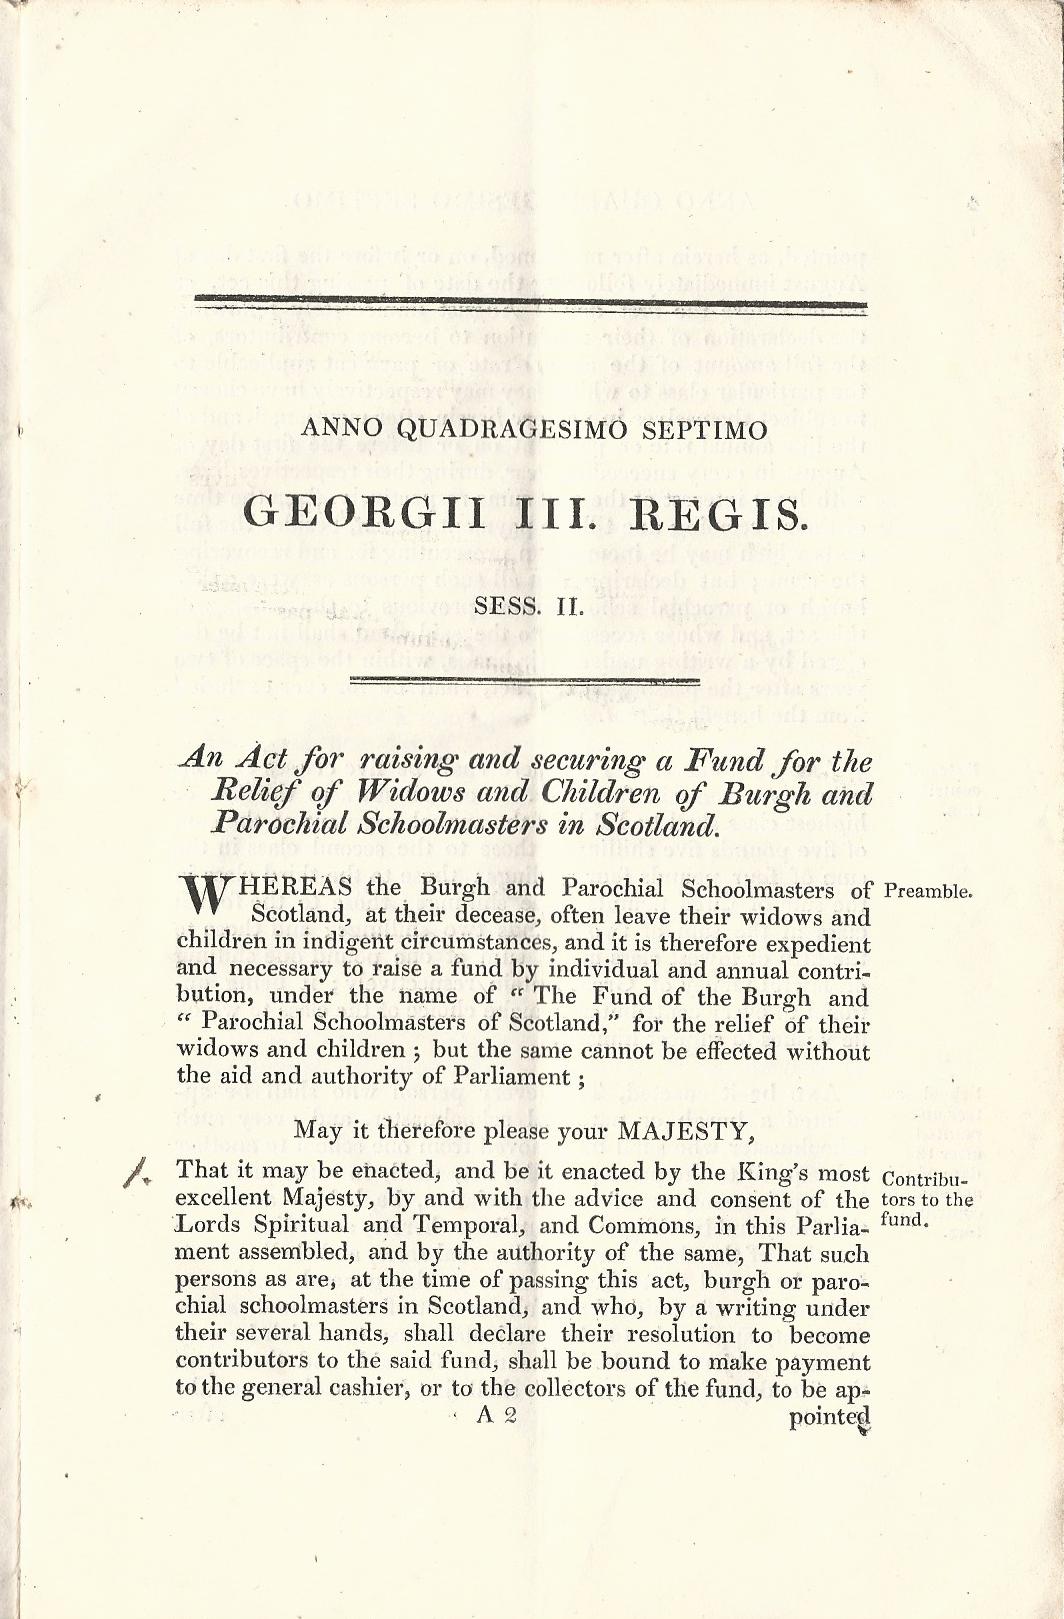 Image for Anno Regni Georgii III Britanniarum Regis Quadragesimo Septimo Sess. II At The Parliament begun and holden at Westminster, the 22d Day of June, Anno Domini 1807, in the 47th year of the Reign of our Sovreign Lord George the Third, by the Grace of God, of the United Kingdom of Great Britain and Ireland Kind, Defender of the Faith; Being the First Session of the Fourth Parliament of the United Kingdom of Great Britain and Ireland.